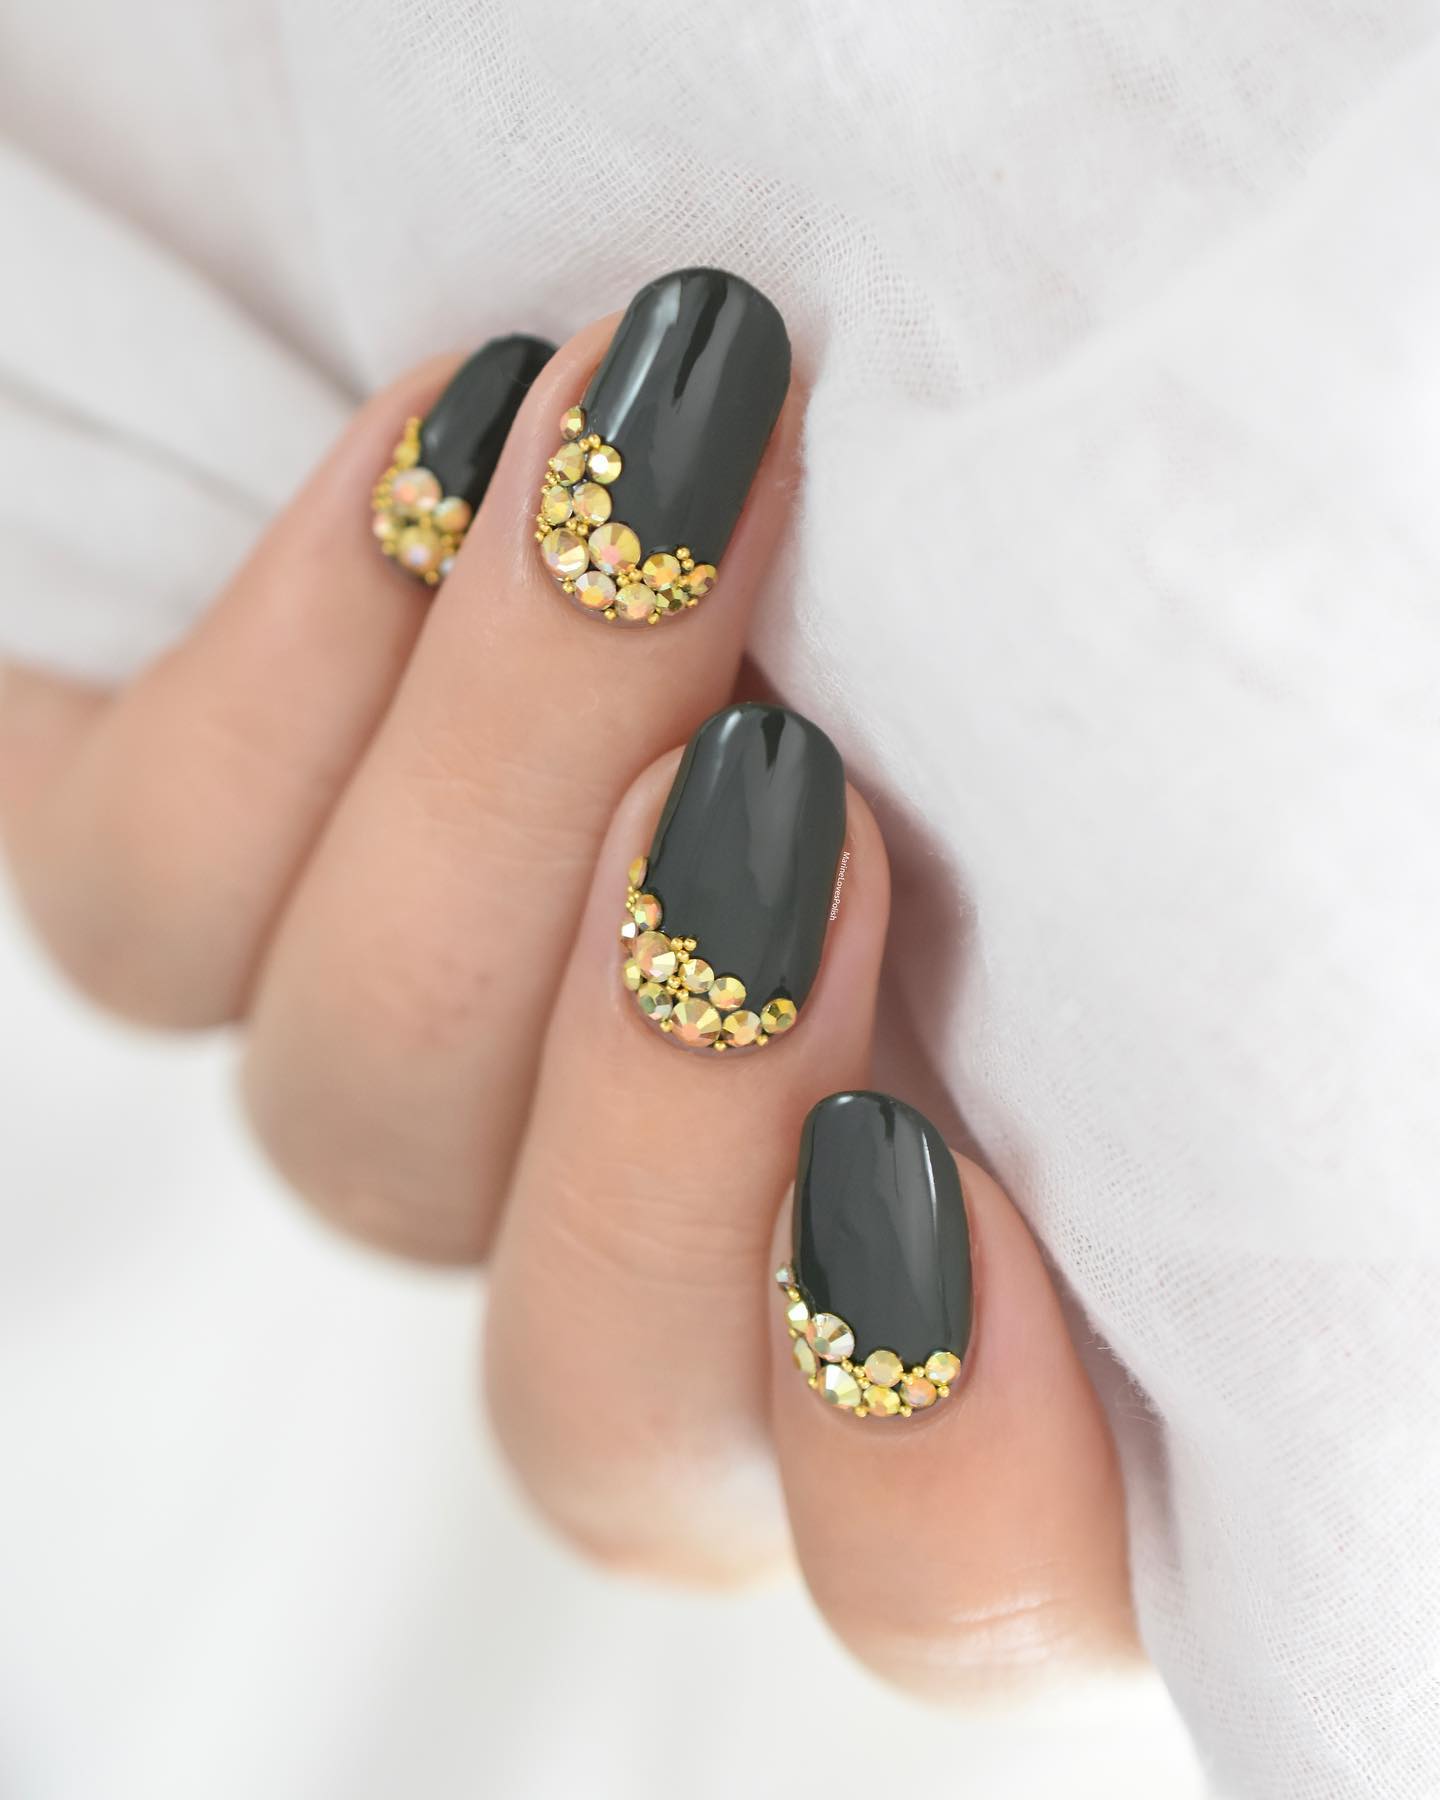 Loden green nails are a combination of the color grey and green. They're a lighter shade than dark green, but they have a tinge of gray to them. To make them shinier, all you need to do is to add some golden stones on top them.